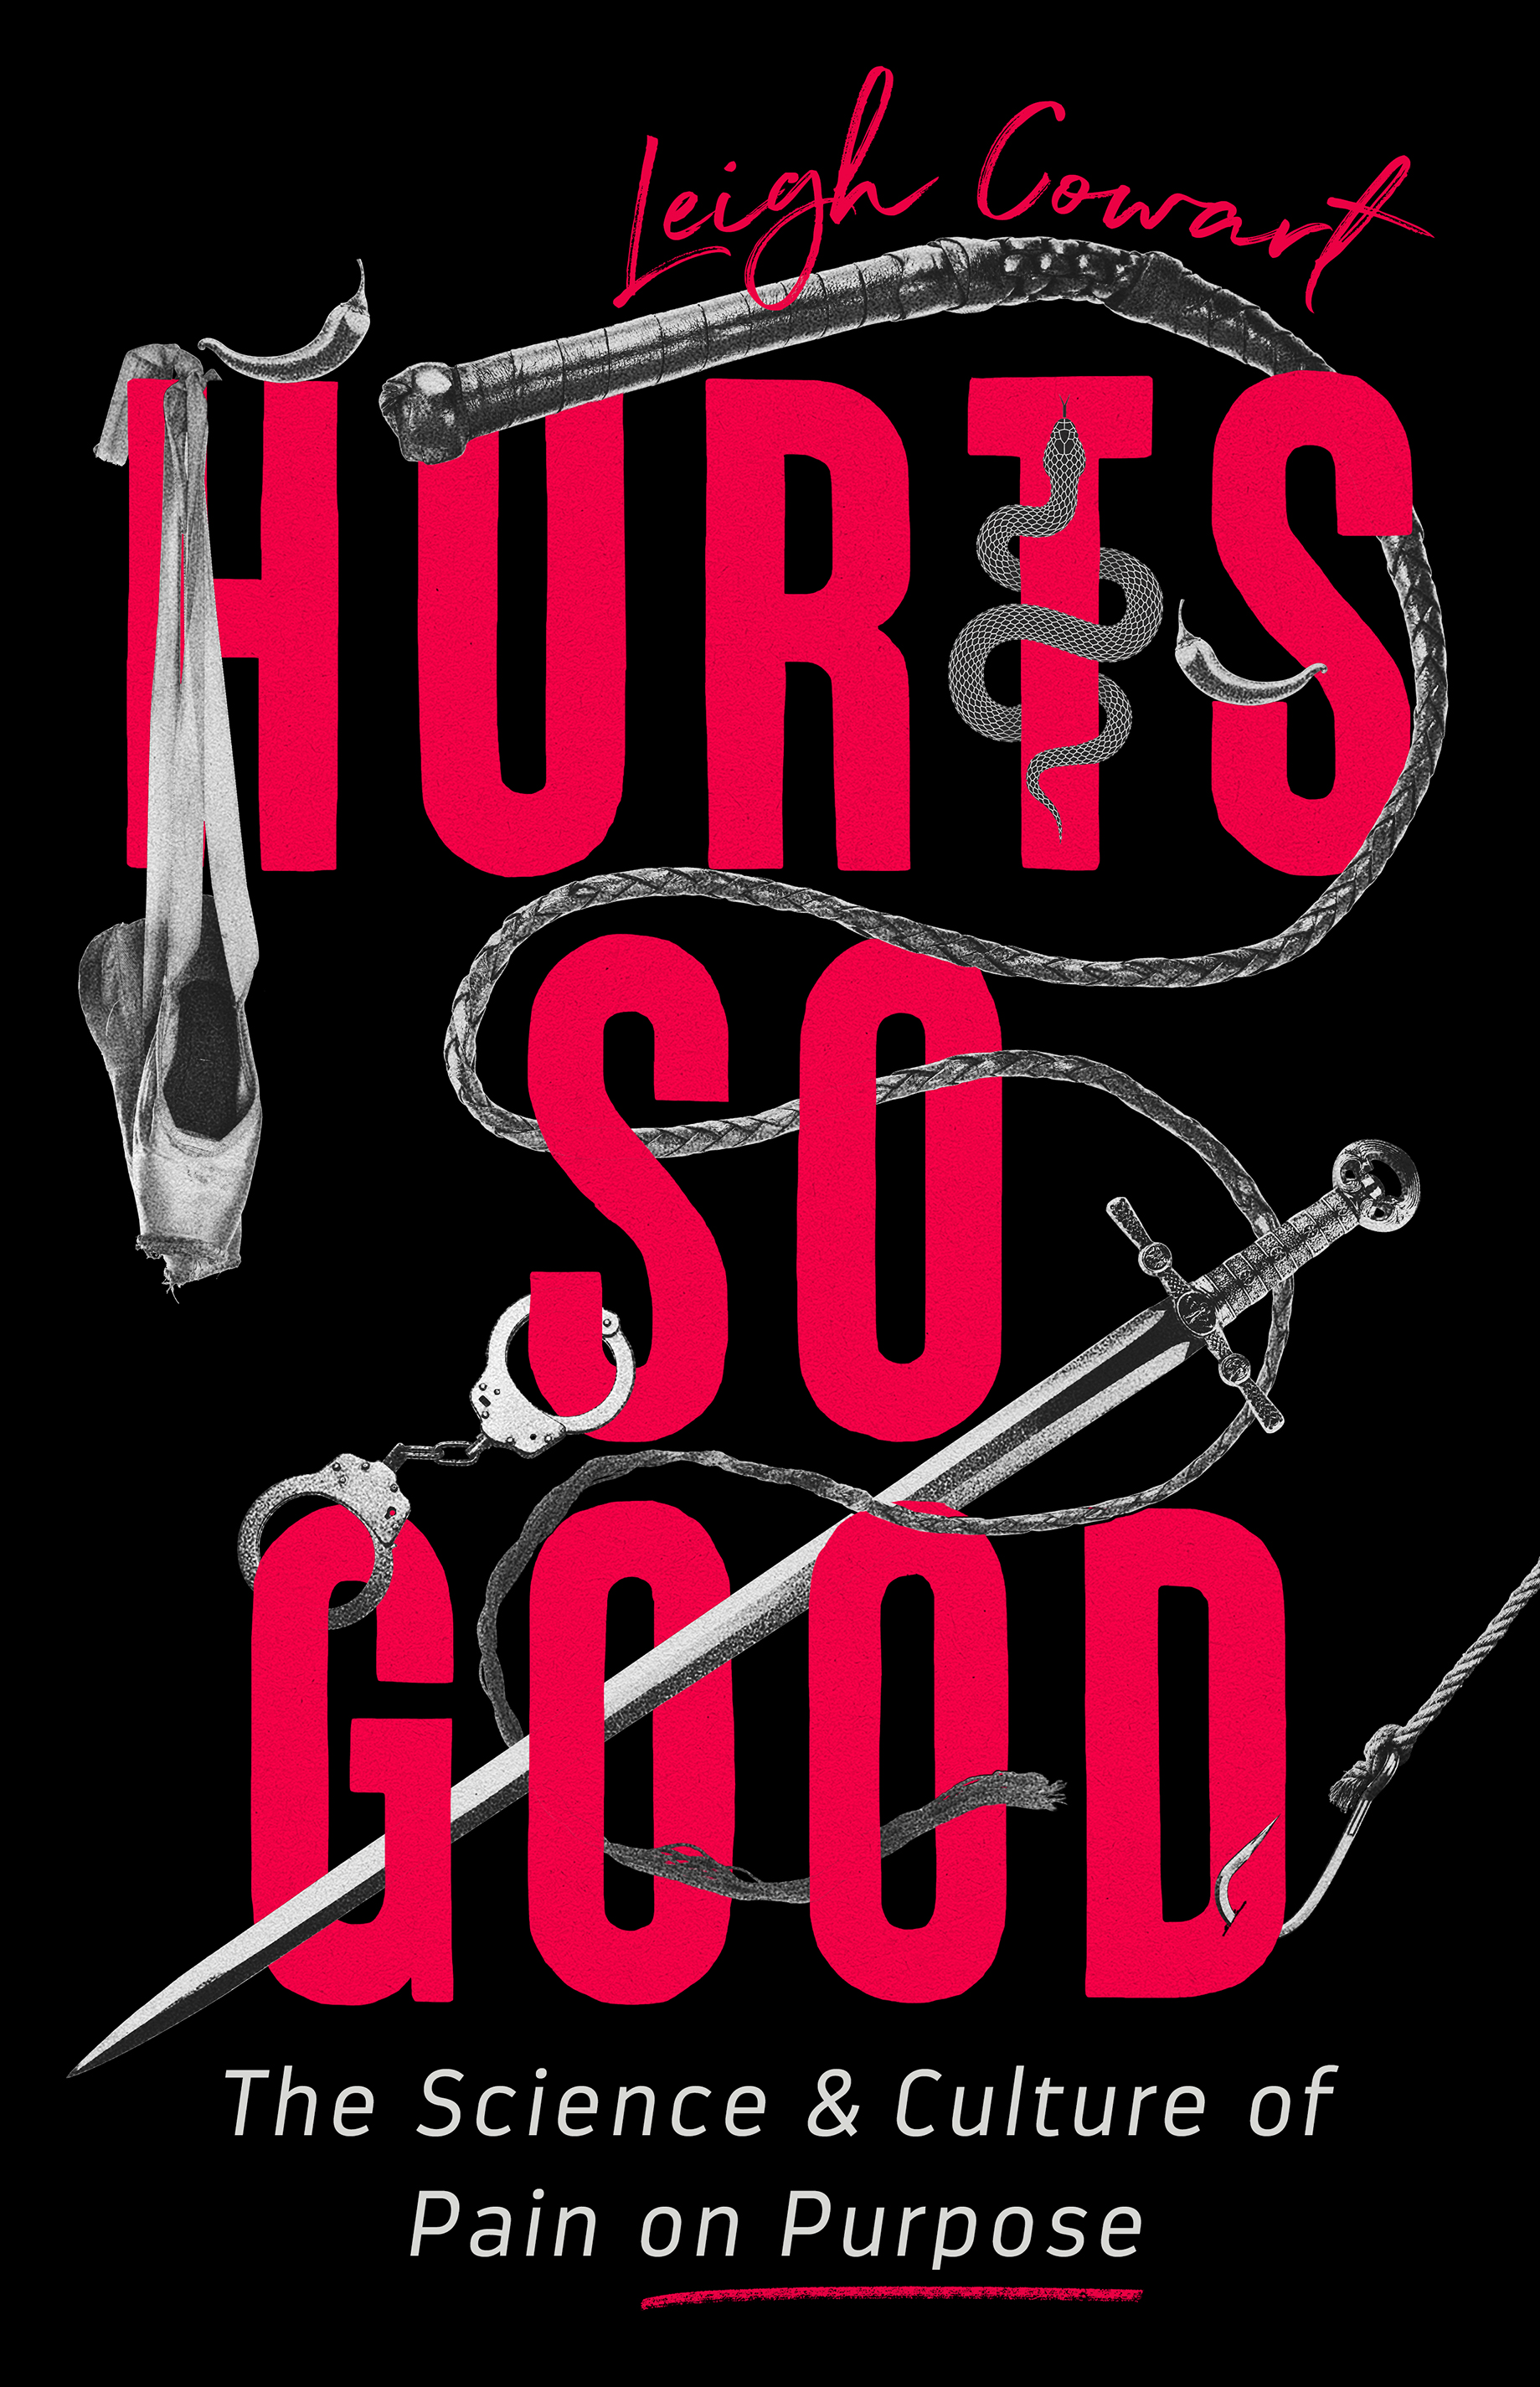 Hurts So Good by Leigh Cowart Hachette Book Group pic picture